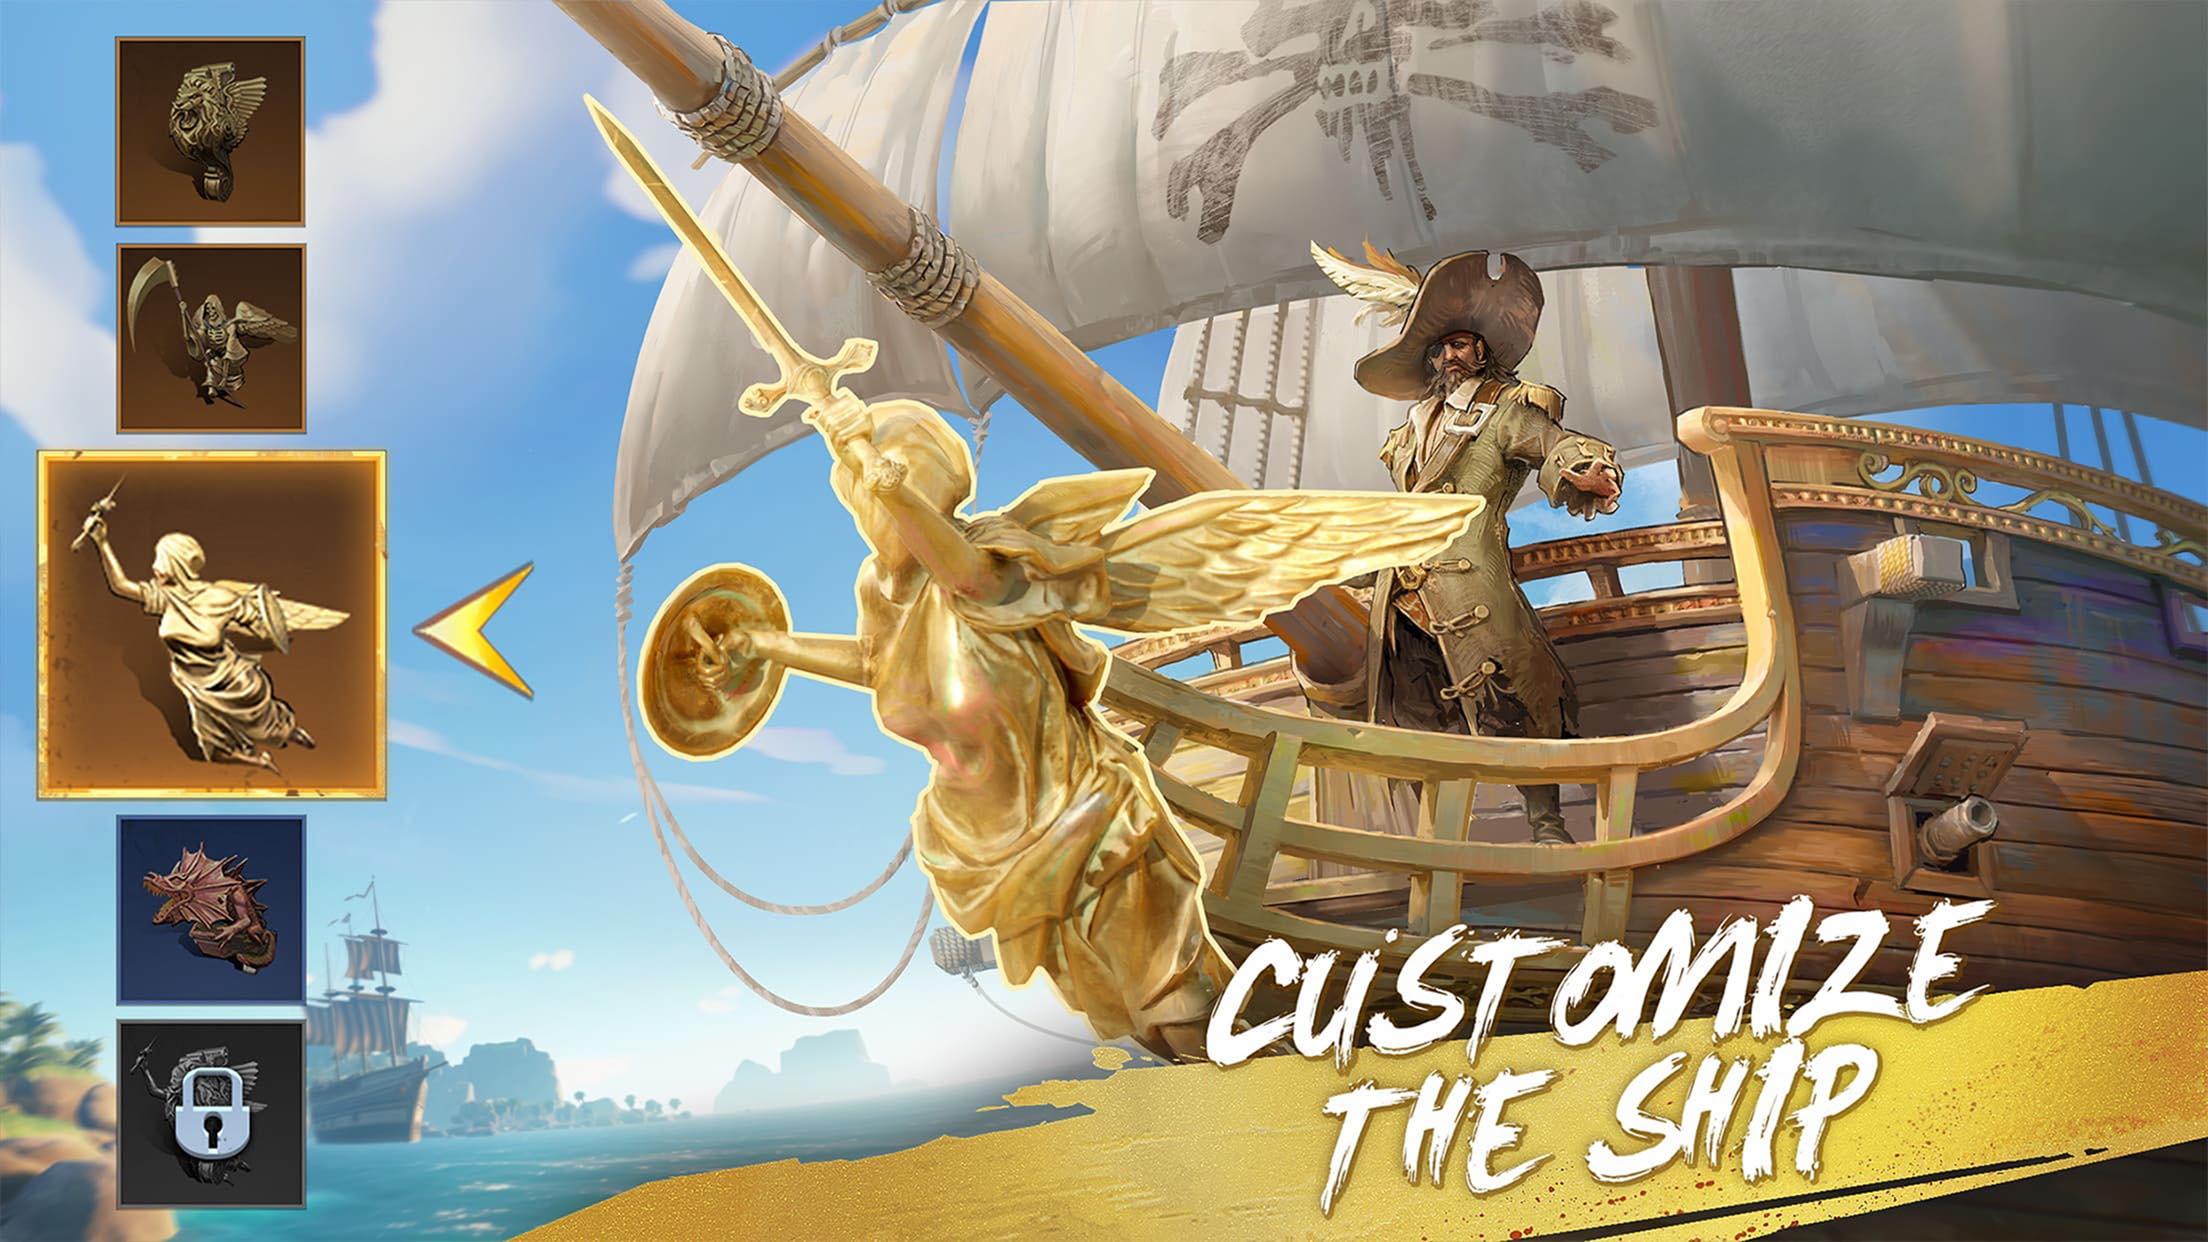 Treasure of the sea & All Redeem Codes  2 Giftcodes Treasure of the sea -  How to Redeem Code 